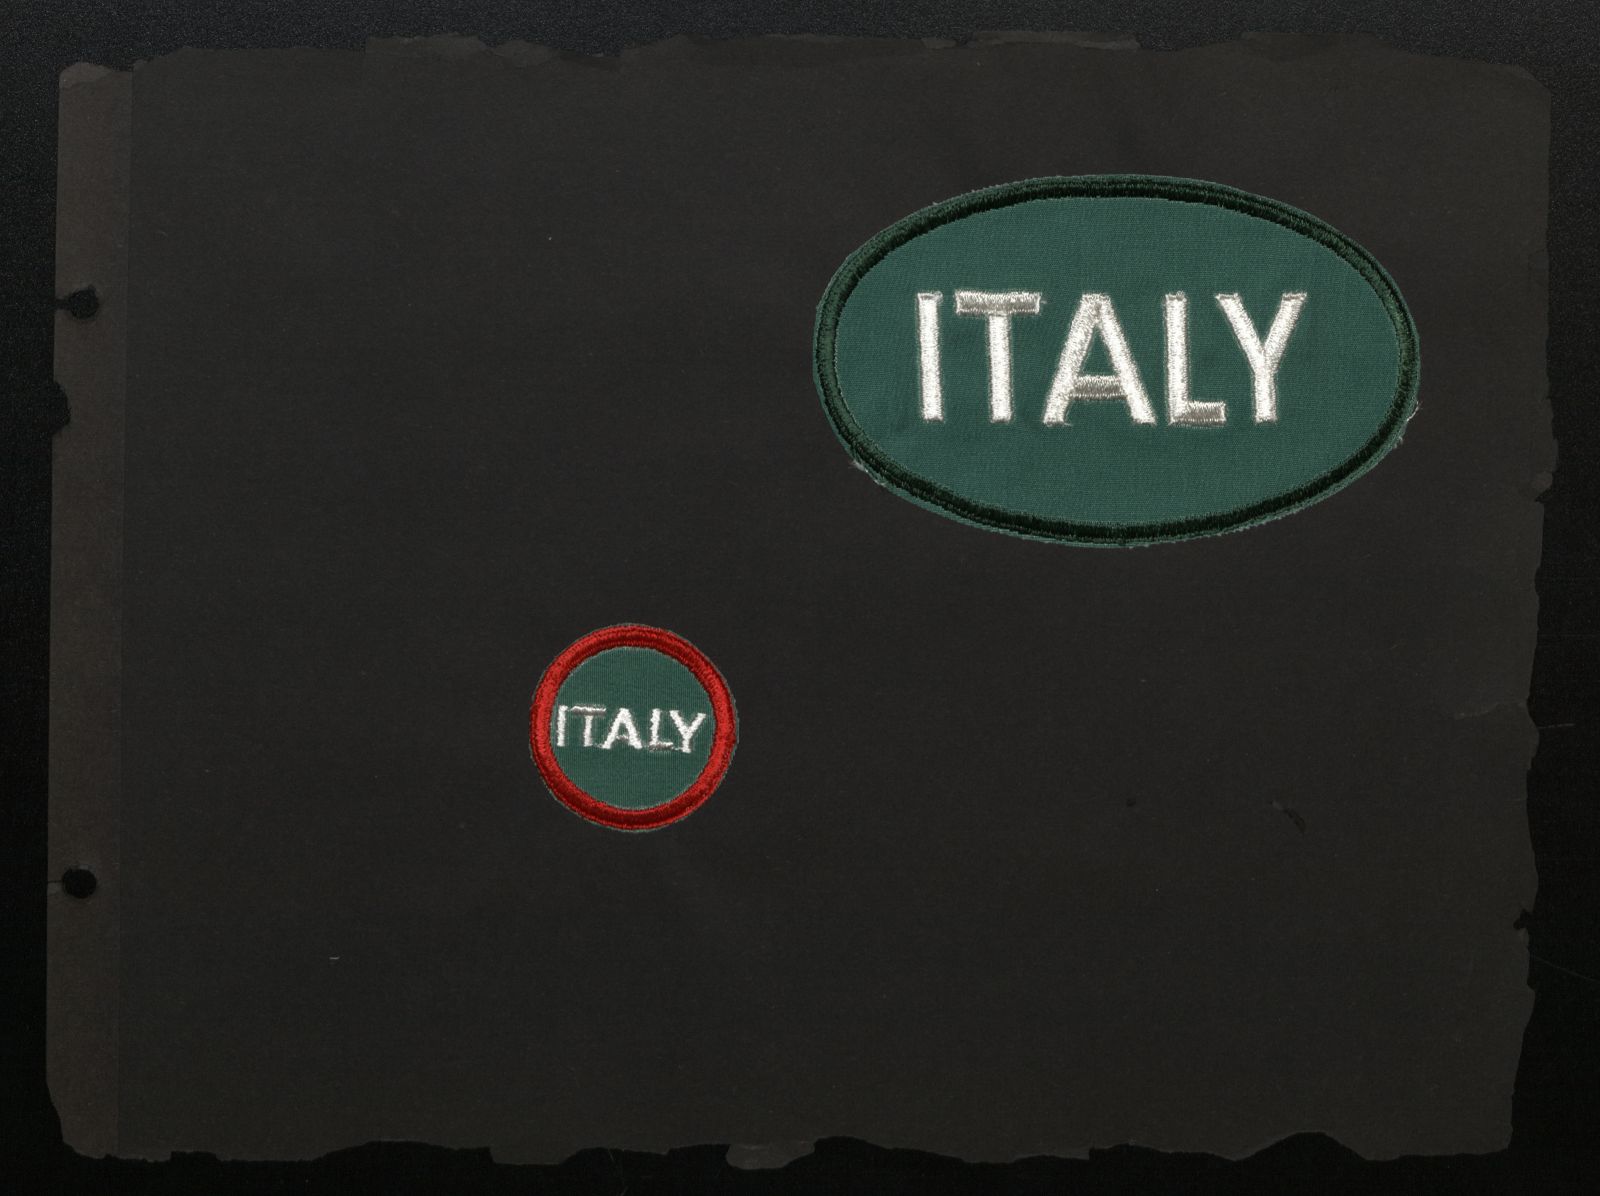 "Italy" badges